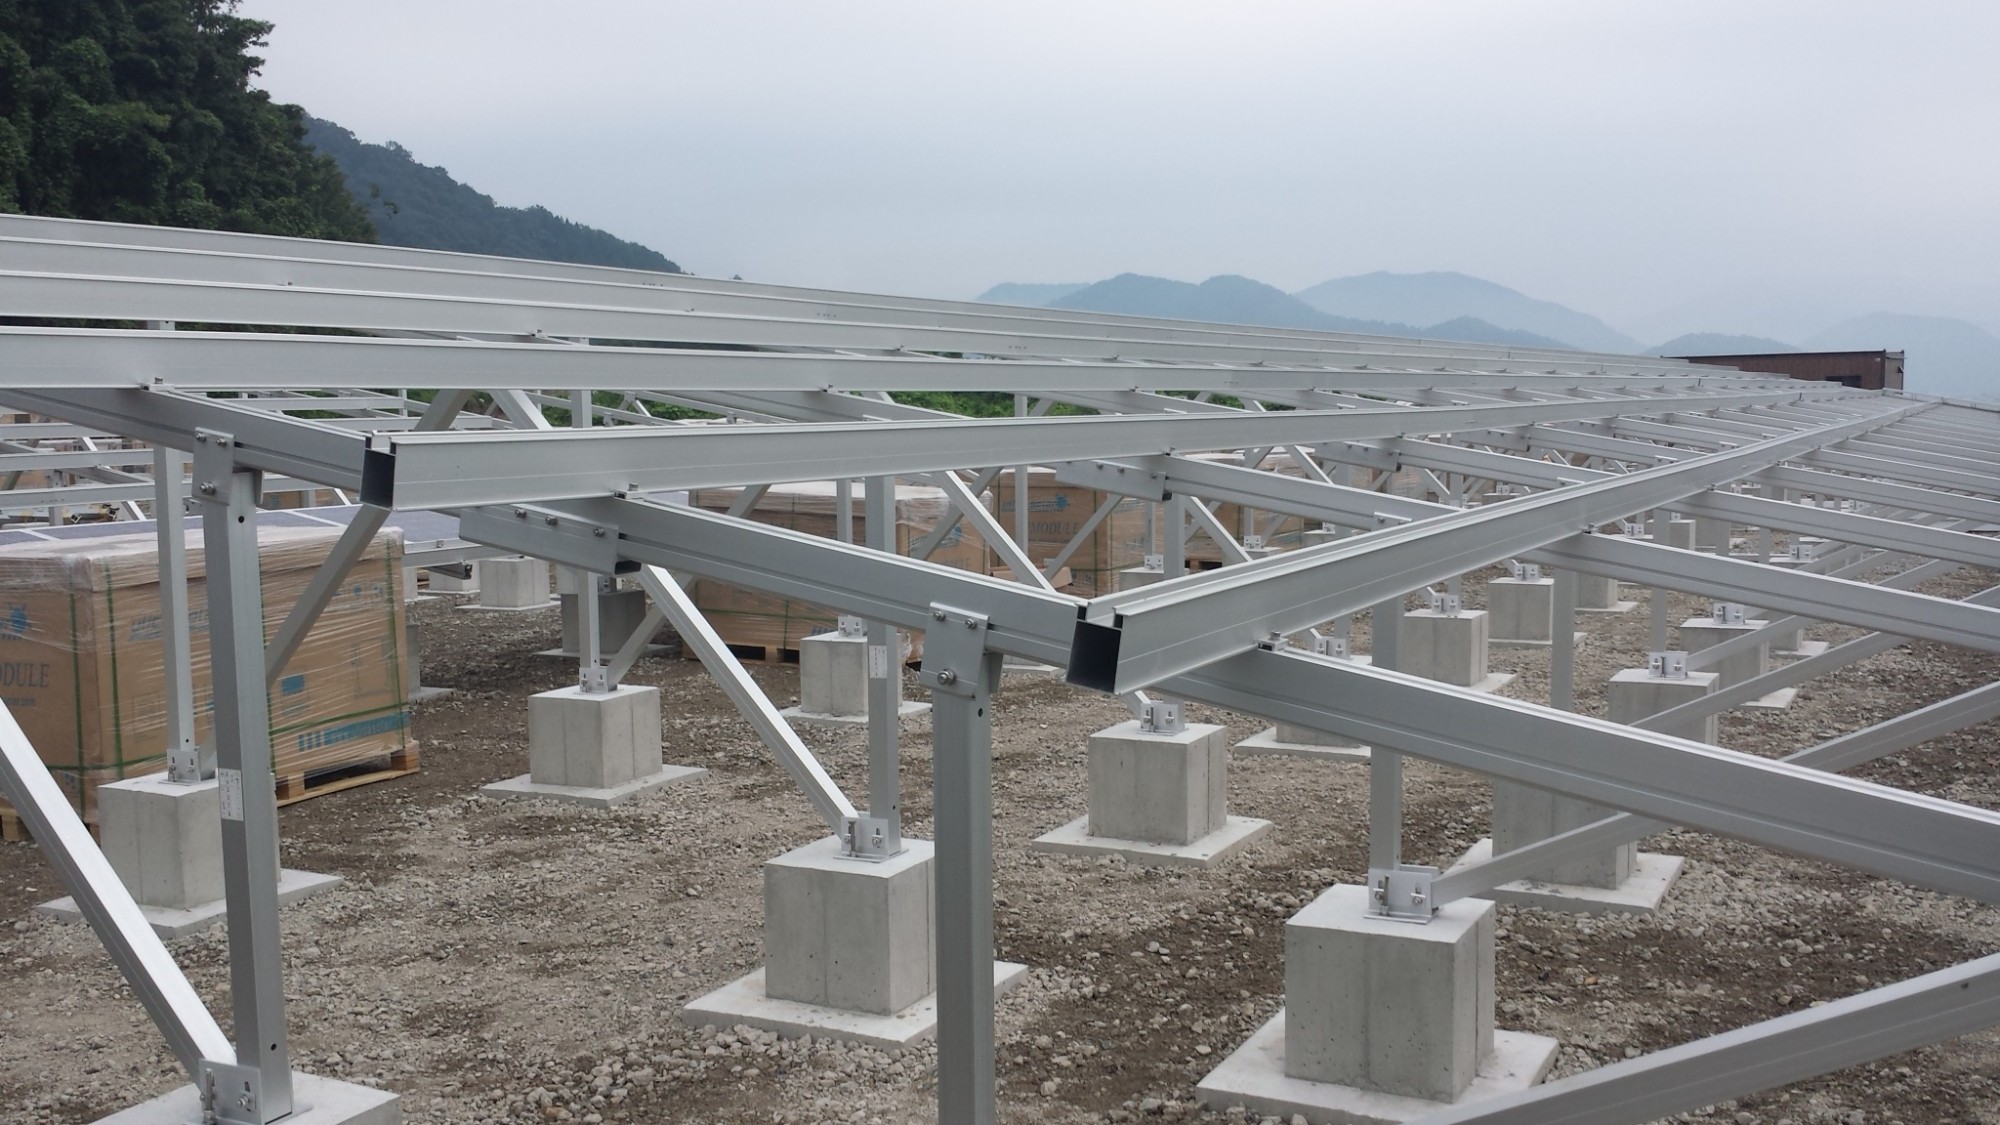 Concret ballast solar energy Mounting Systems Manufacturers, Concret ballast solar energy Mounting Systems Factory, Supply Concret ballast solar energy Mounting Systems